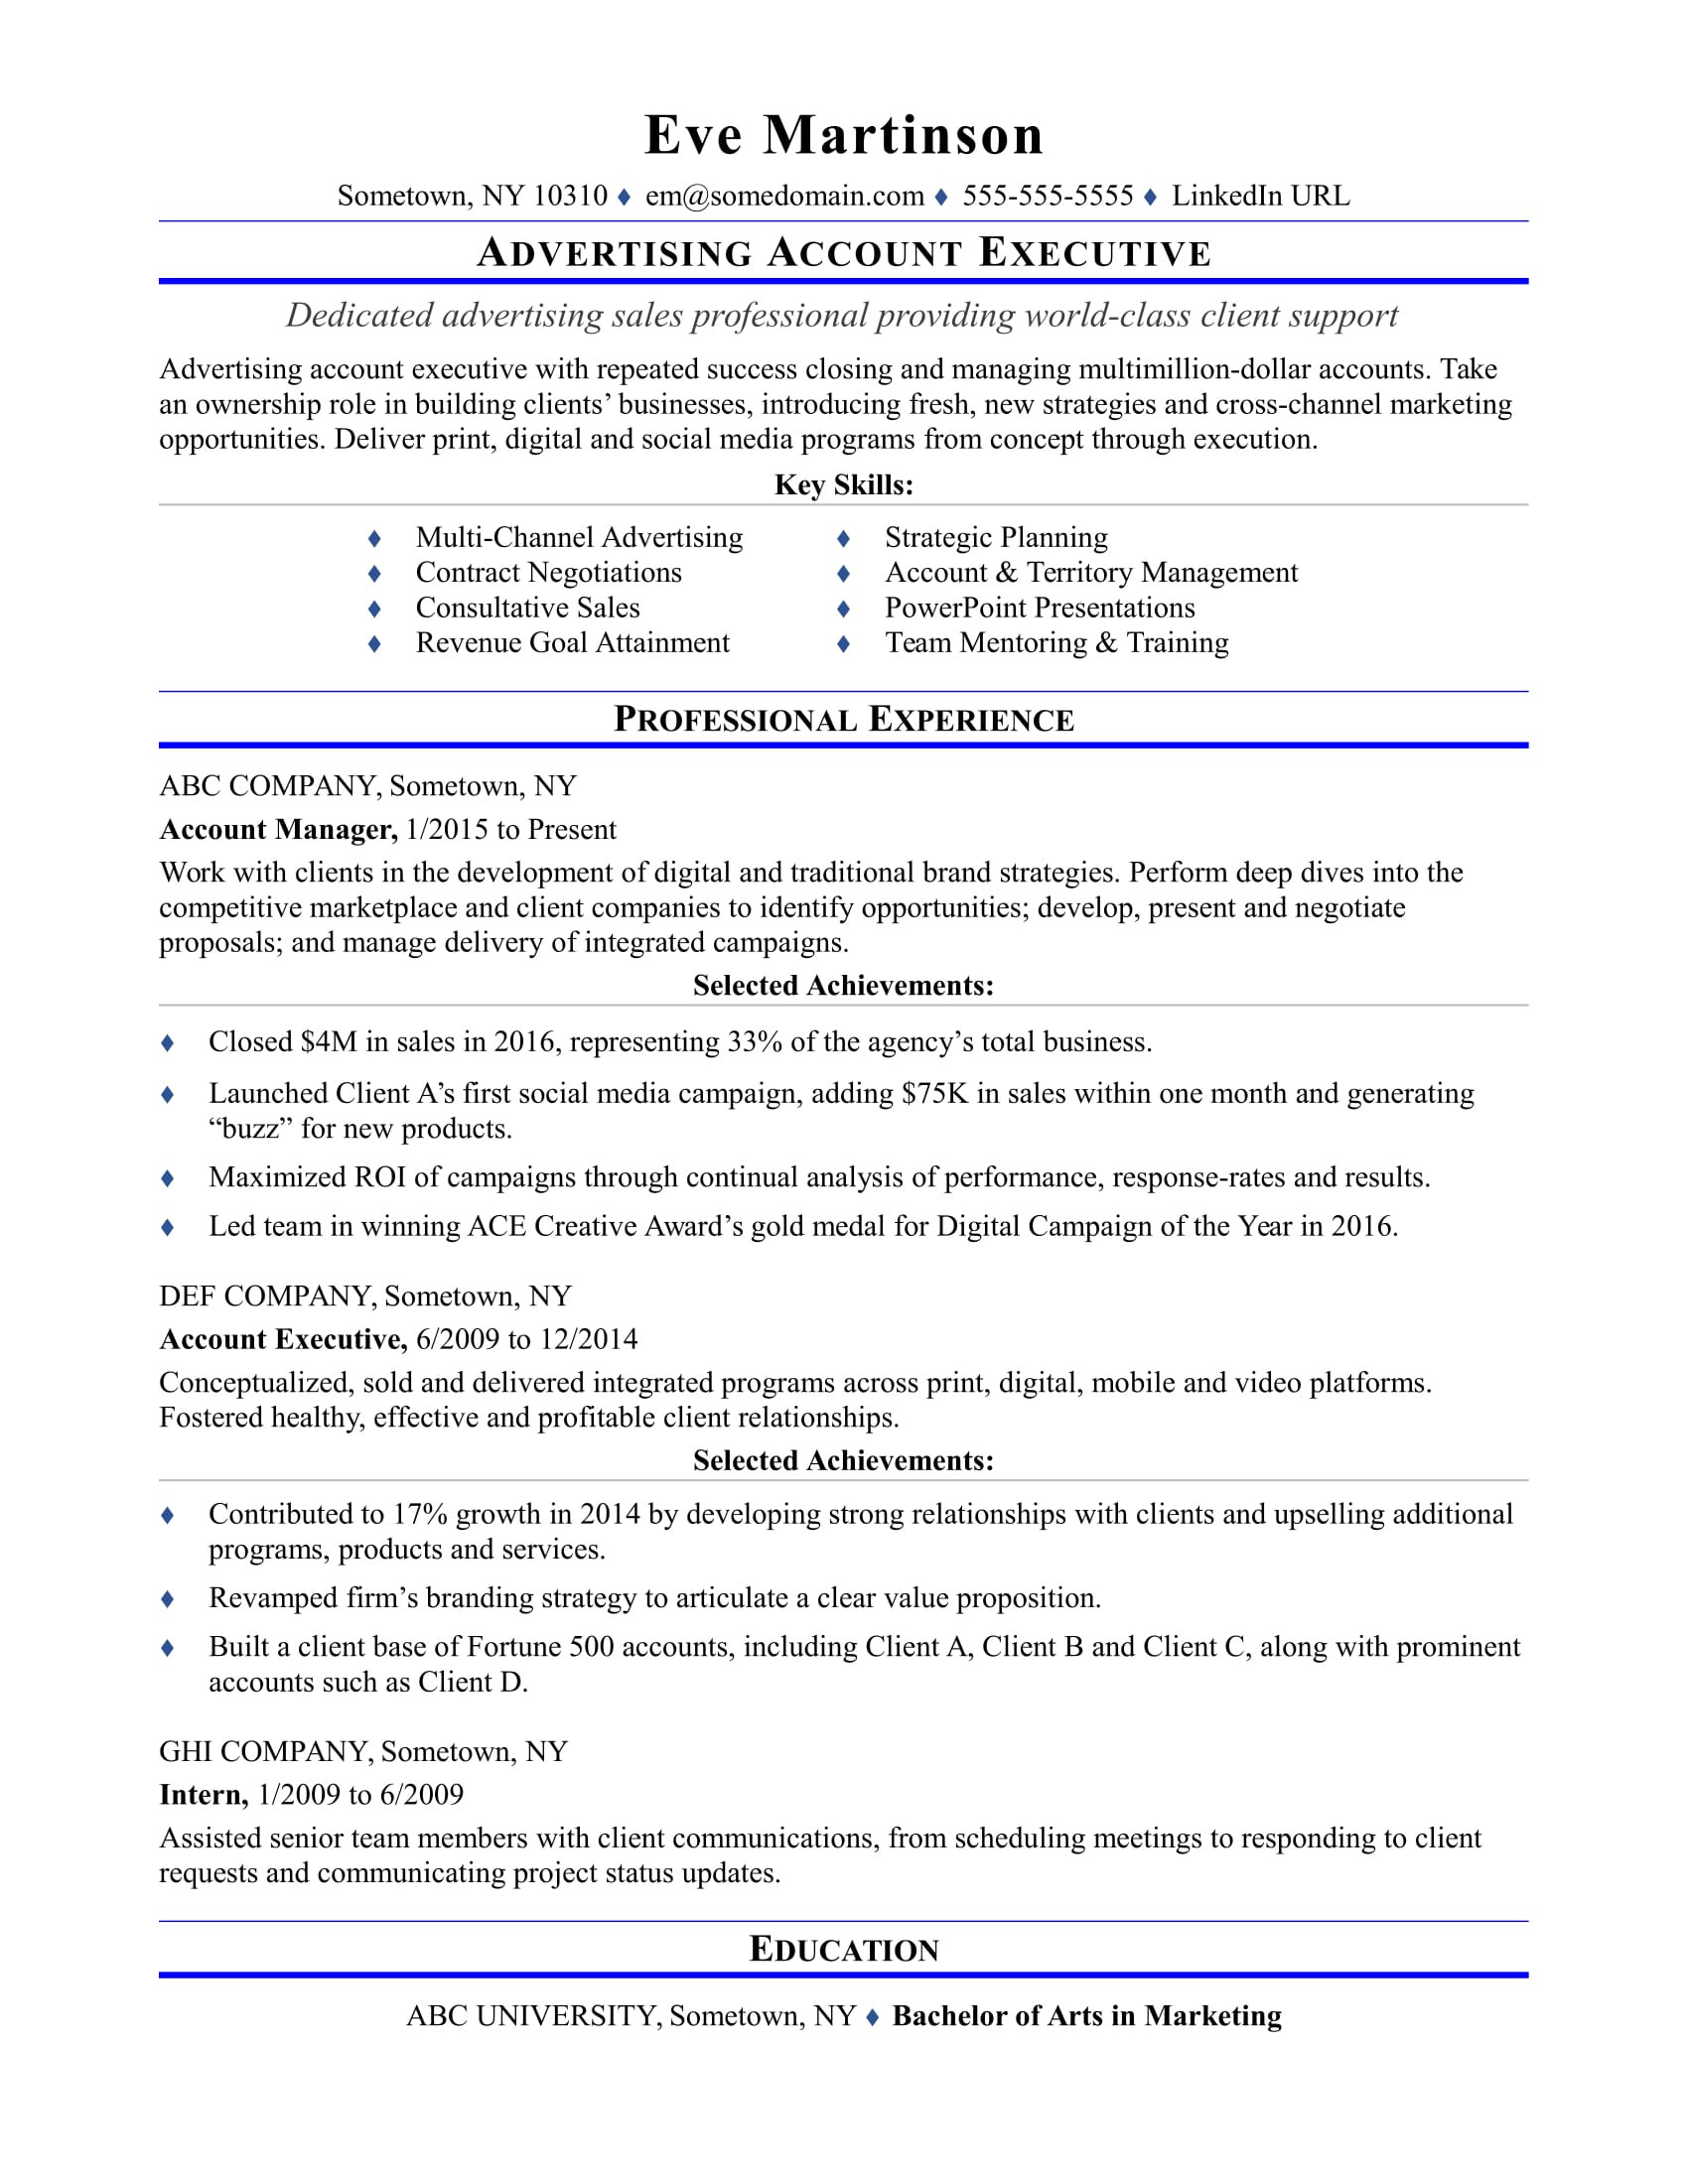 Resume Samples for Account Executive In Sales Sample Resume for An Advertising Account Executive Monster.com